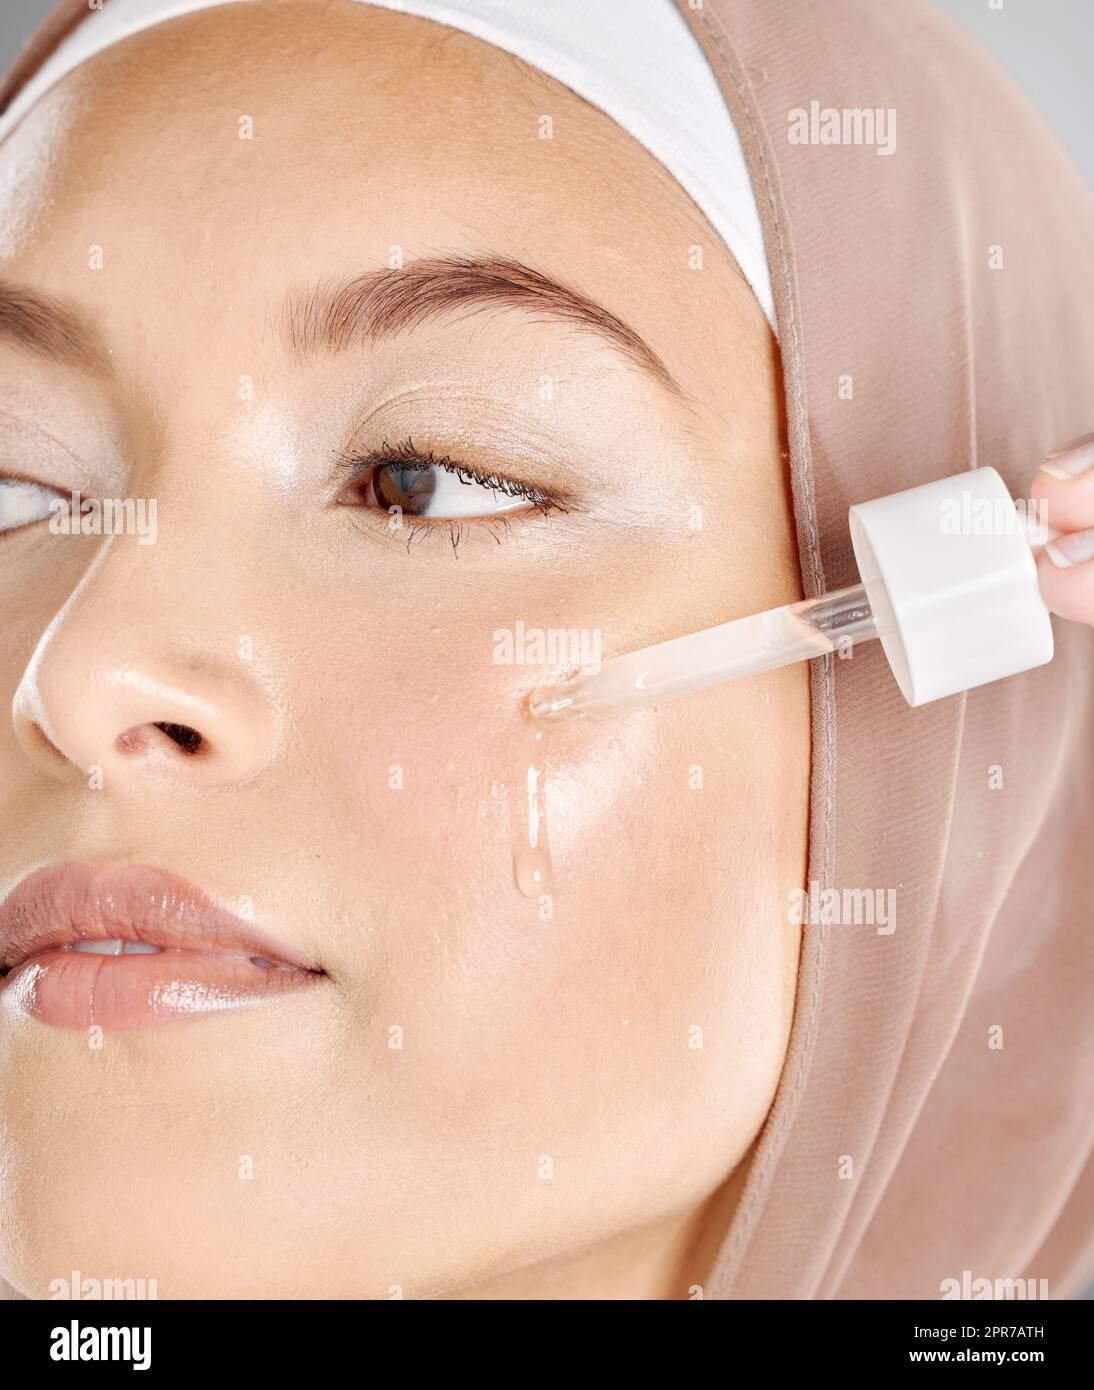 A young woman applying antiaging facial serum to her face and skin. Beautiful muslim girl wearing a hijab trying retinol with a dropper as her skincar Stock Photo